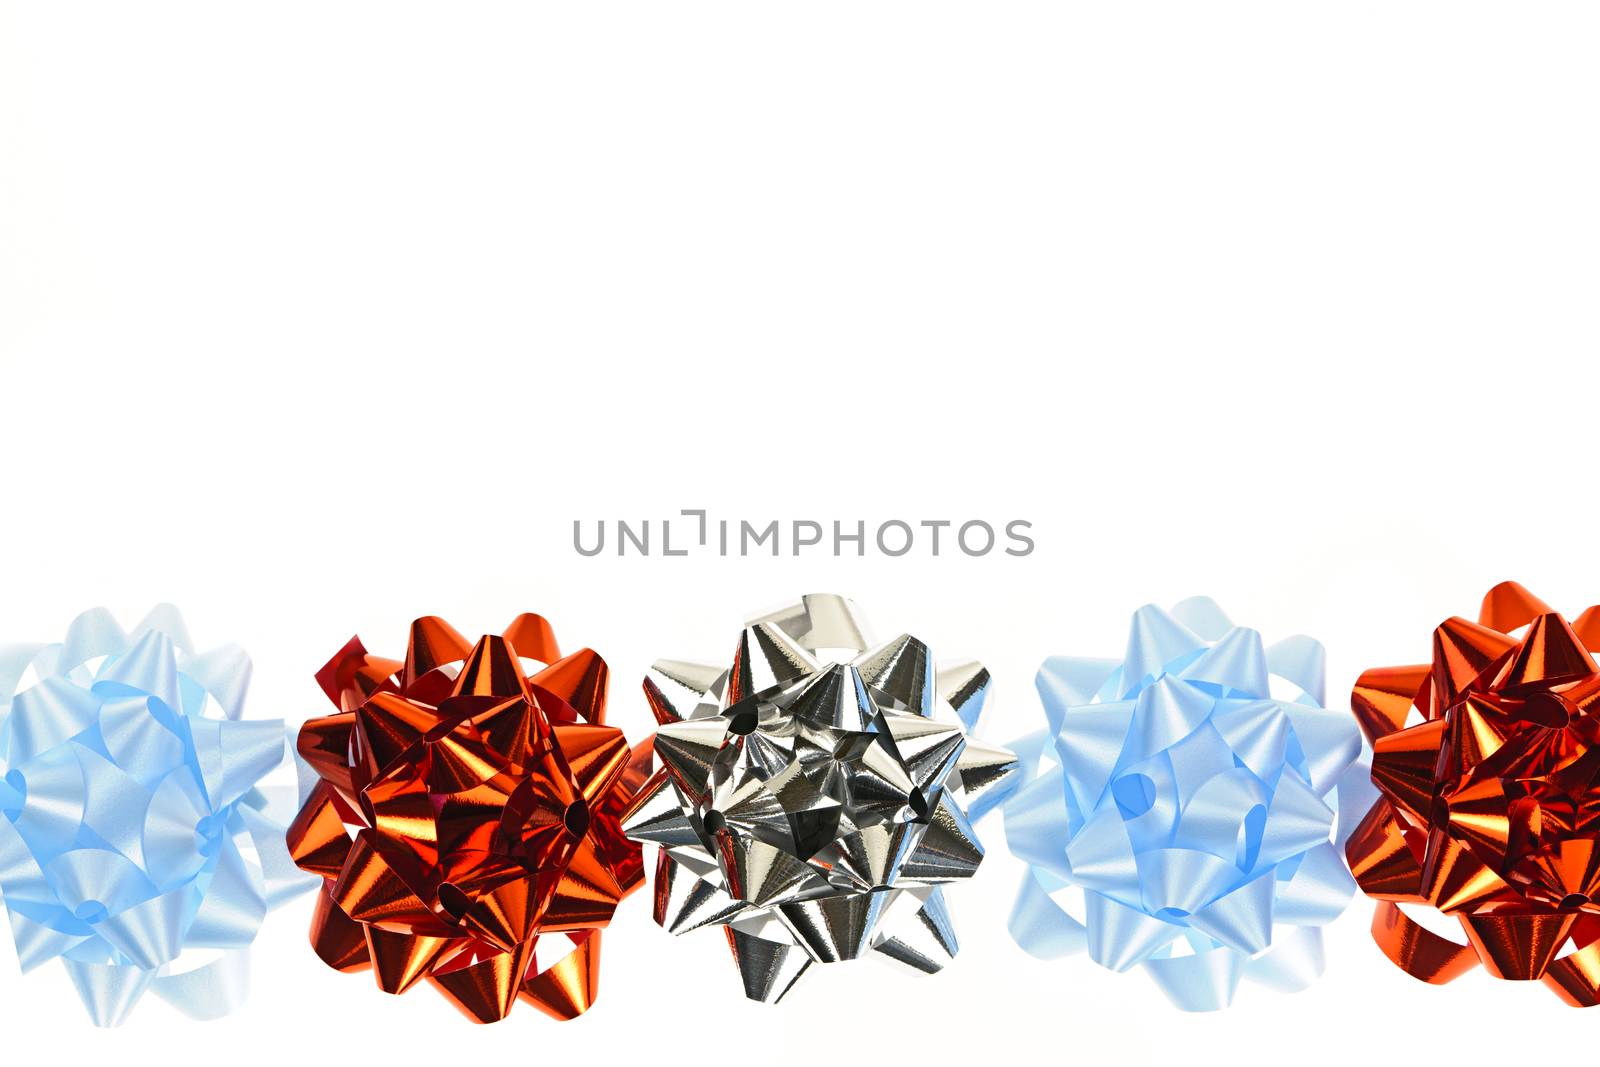 Row of multicolored gift wrapping bows isolated on white background